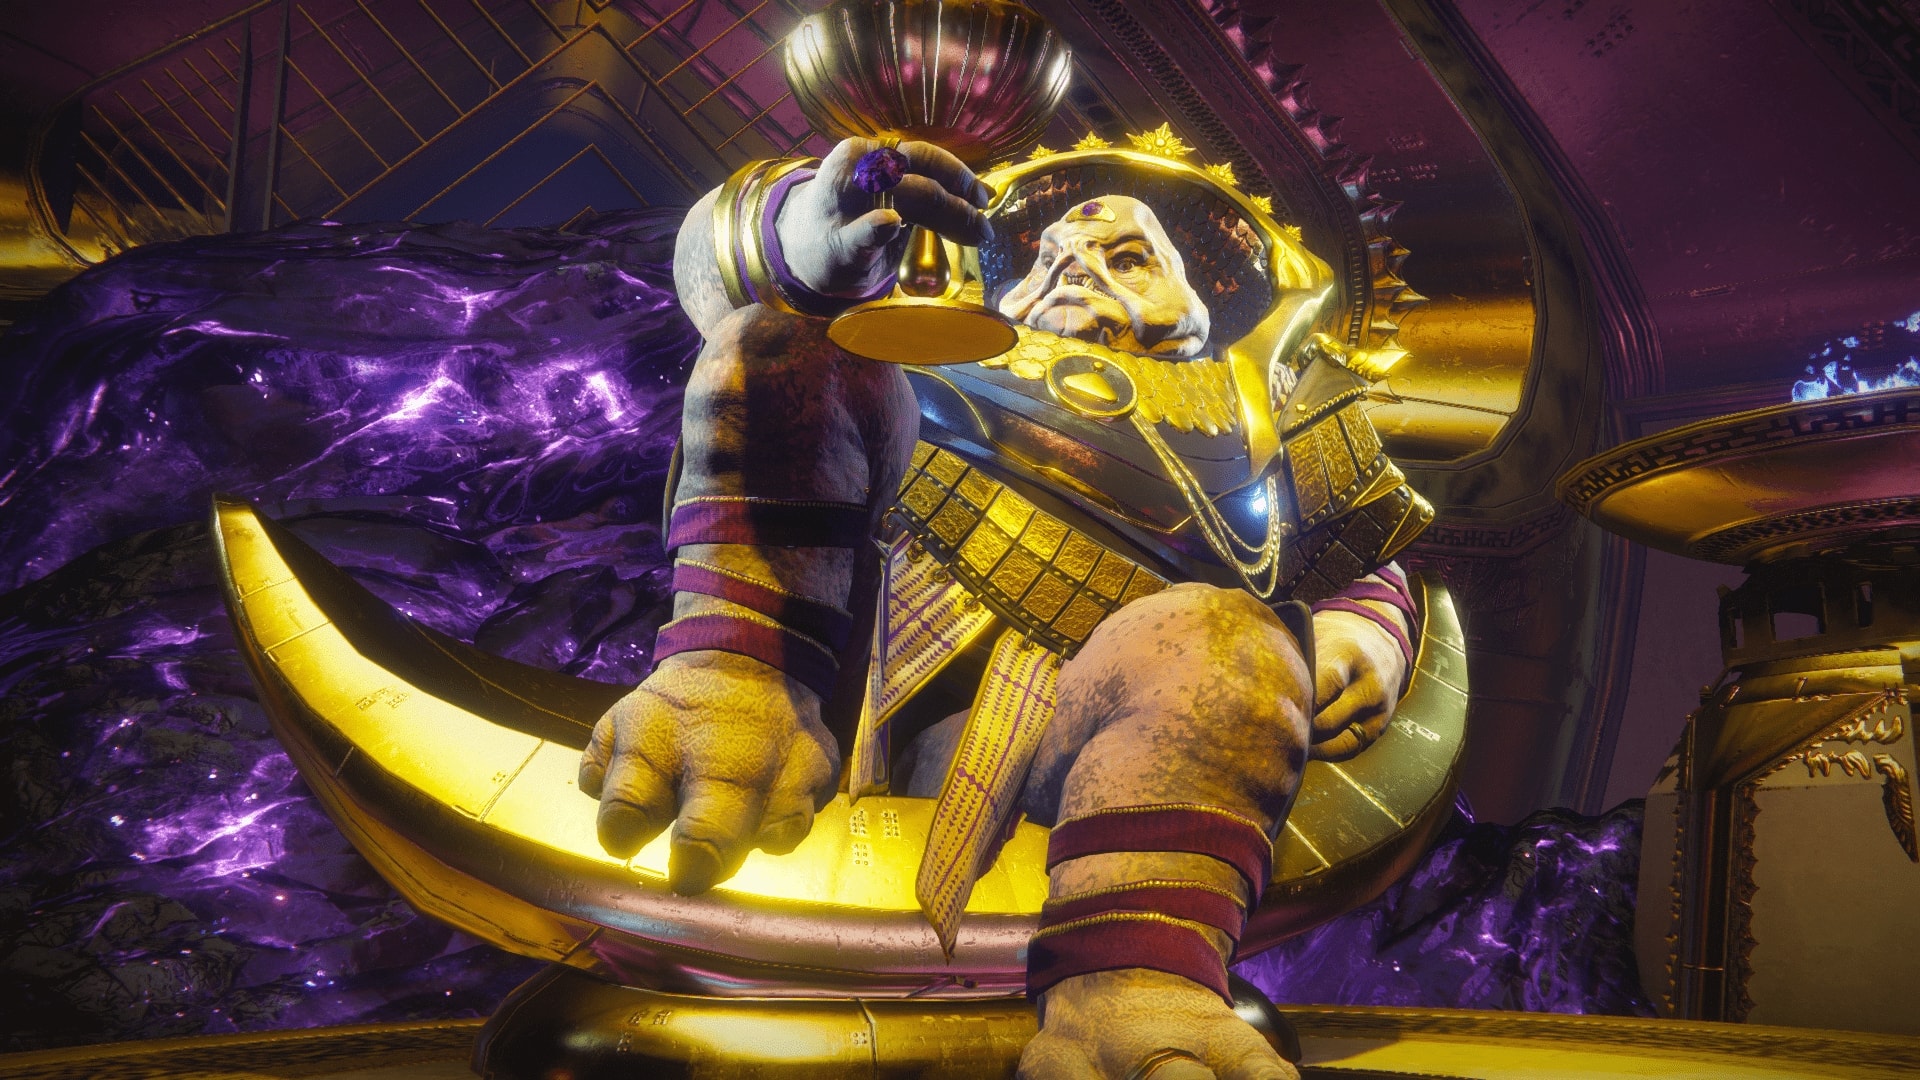 Clan-Redeem-uses-controversial-exploit-to-claim-world-first-in-Destiny-2s-Prestige-raid